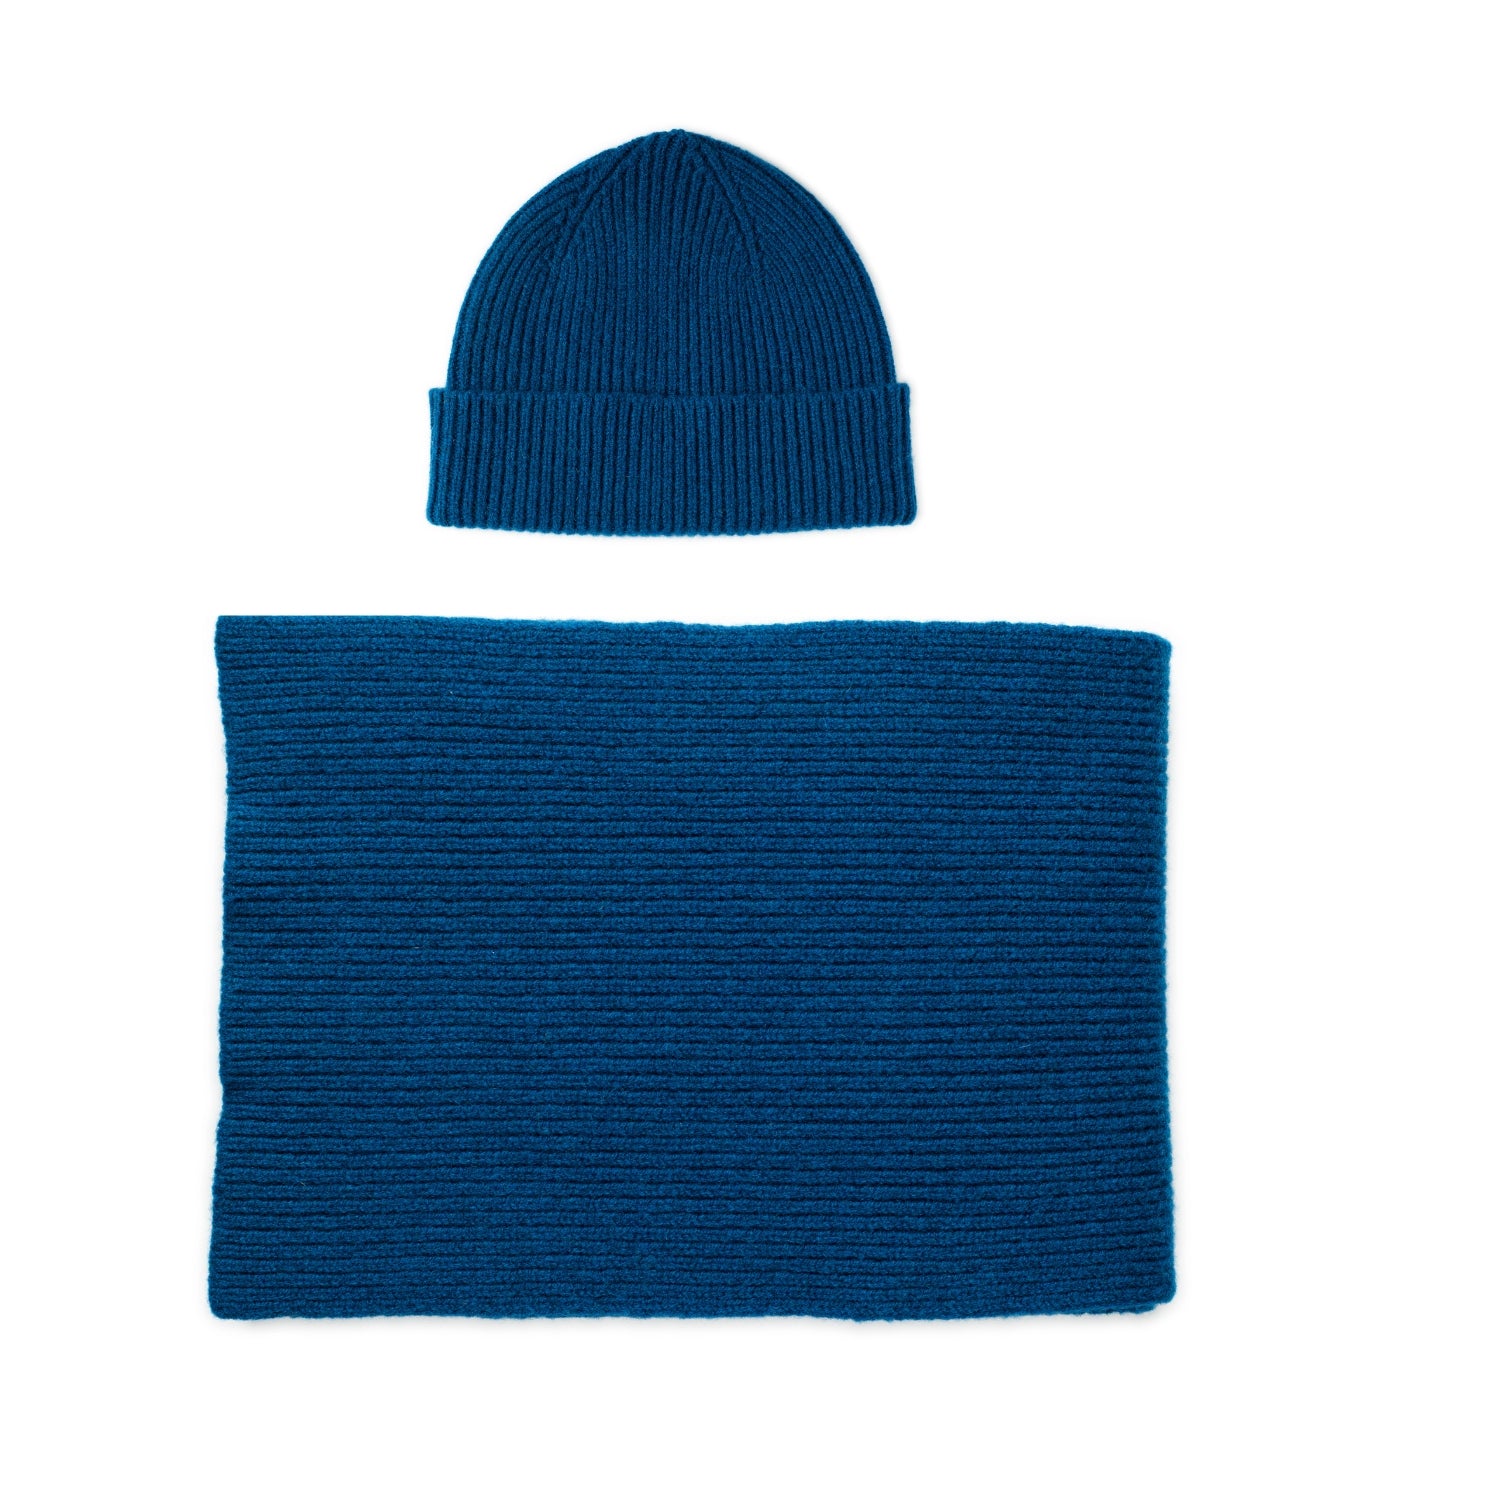 Ocean blue lambswool hat and scarf set